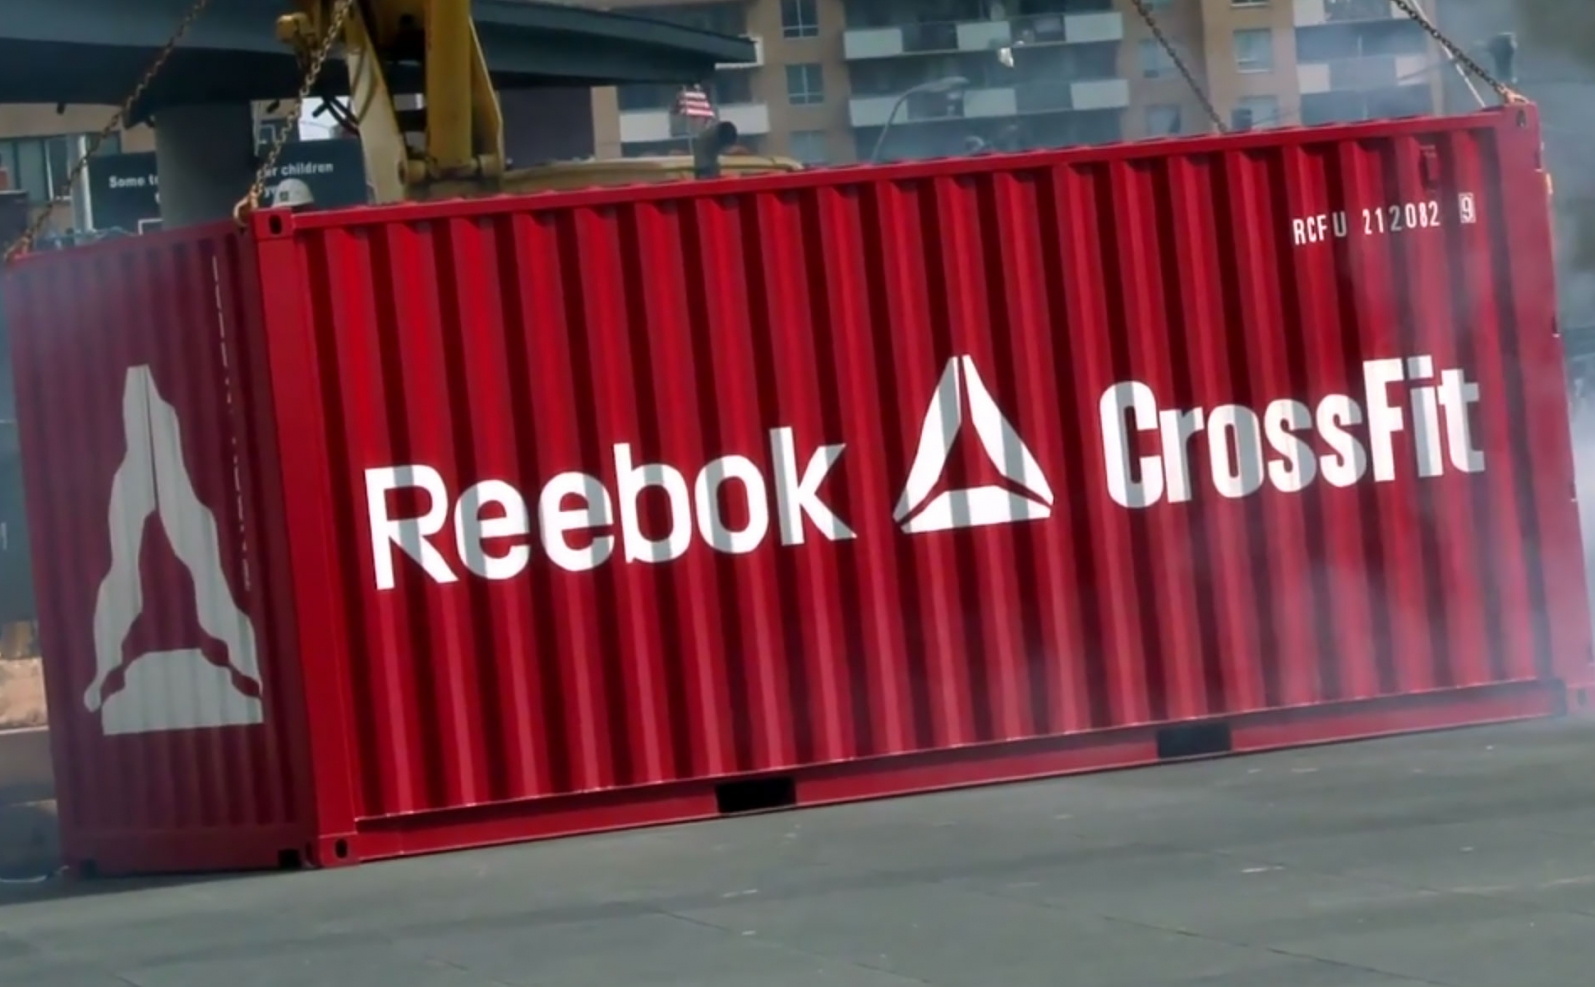 reebok crossfit shipping containers